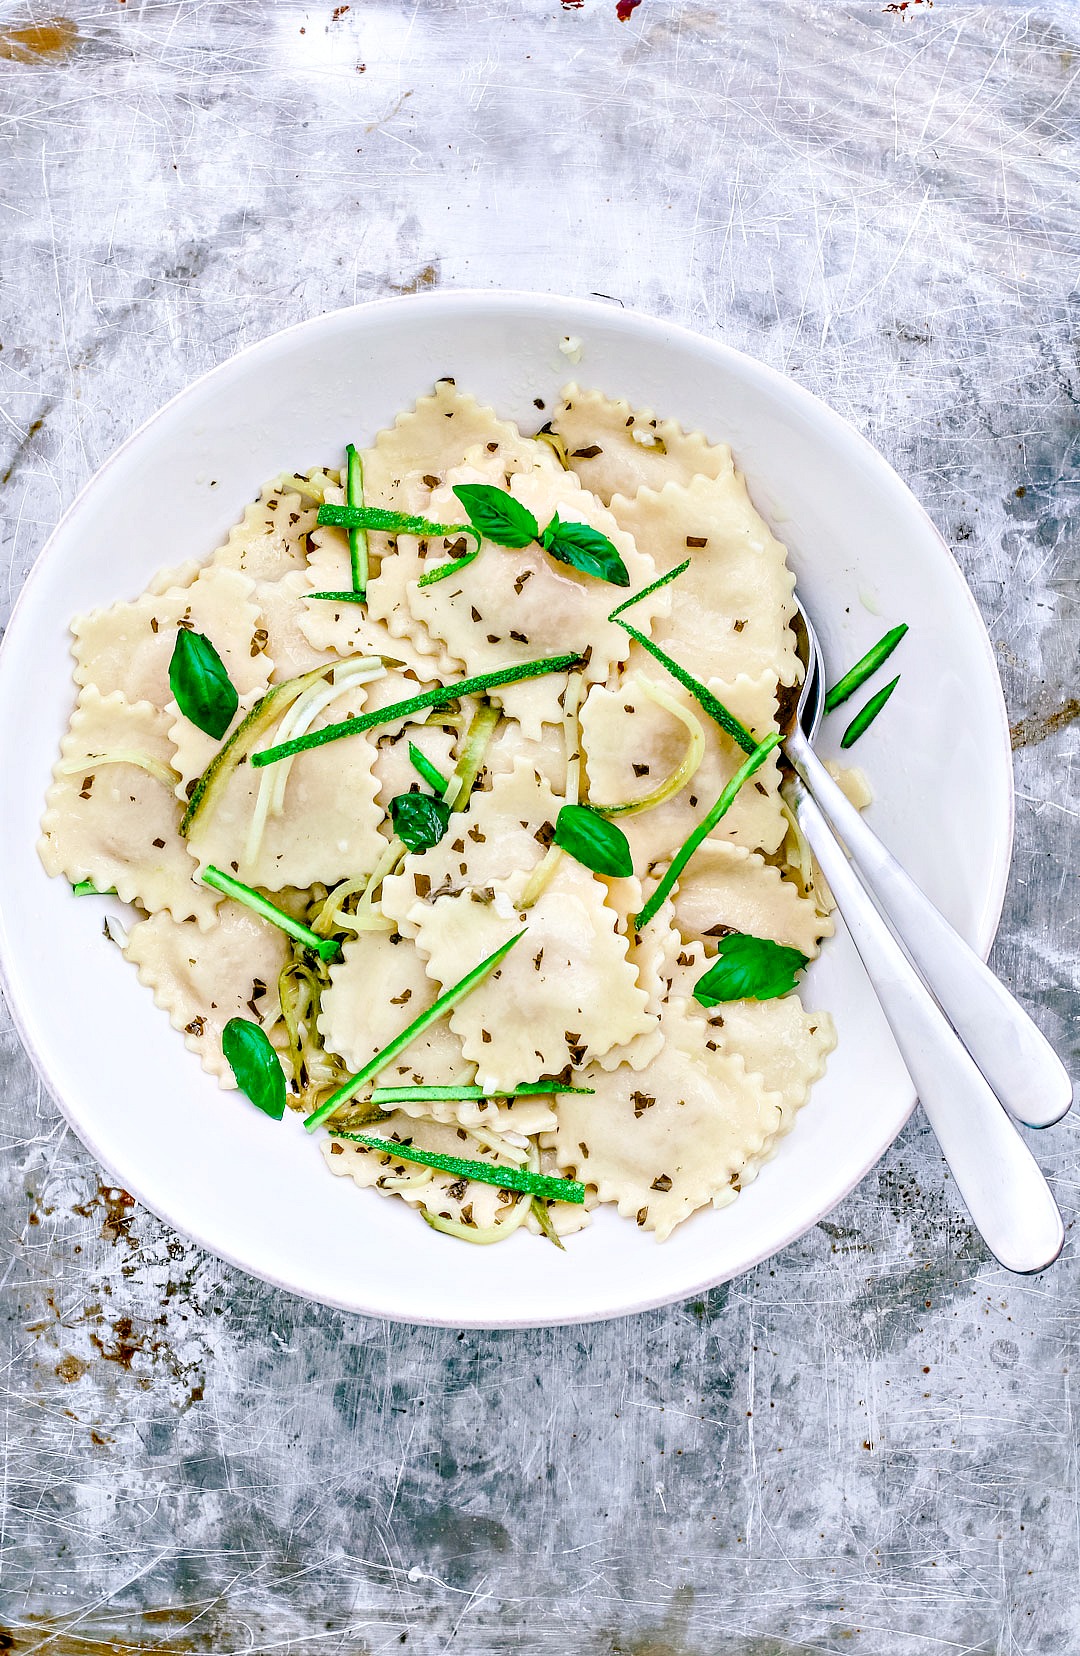 10-Minute Cheese Ravioli With Lemon Basil Butter Sauce | Killing Thyme